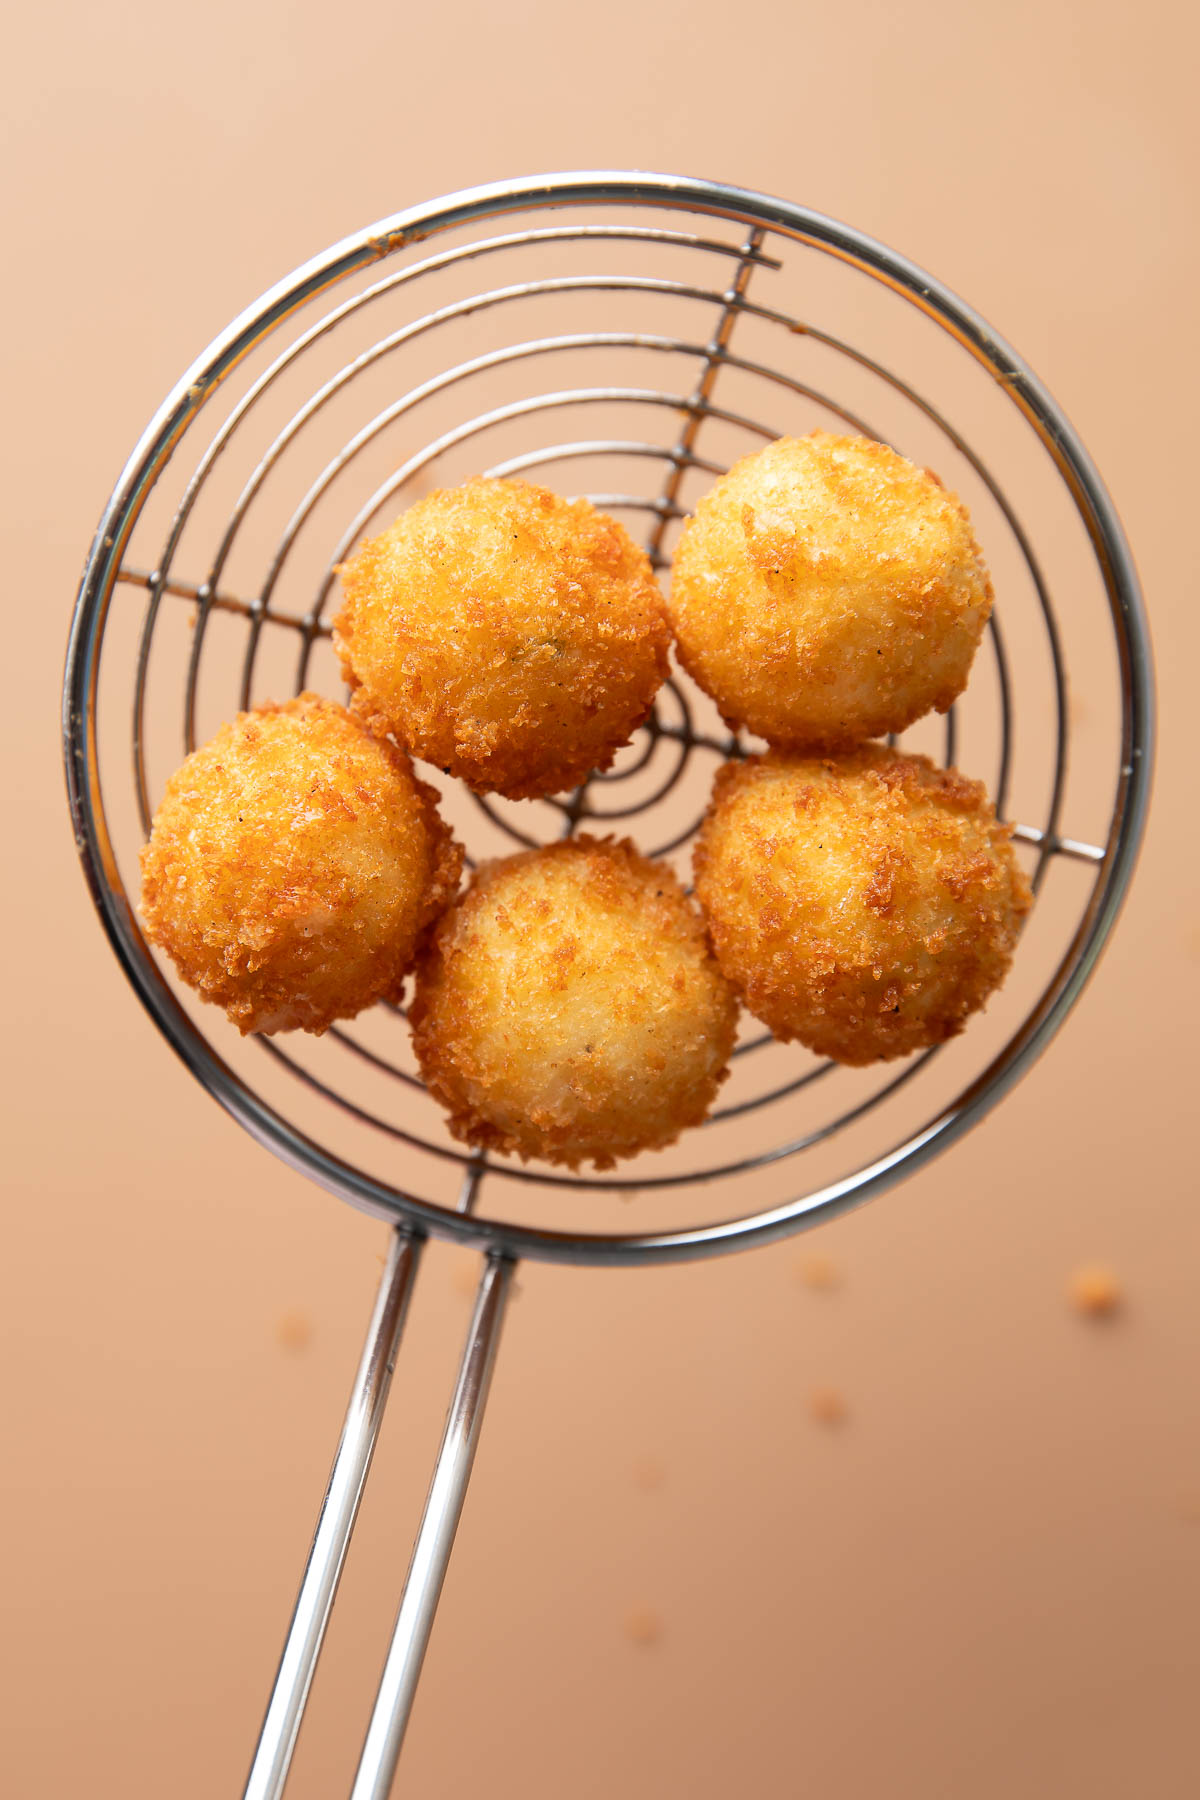 remove fried mashed potato balls from oil using a slotted spoon